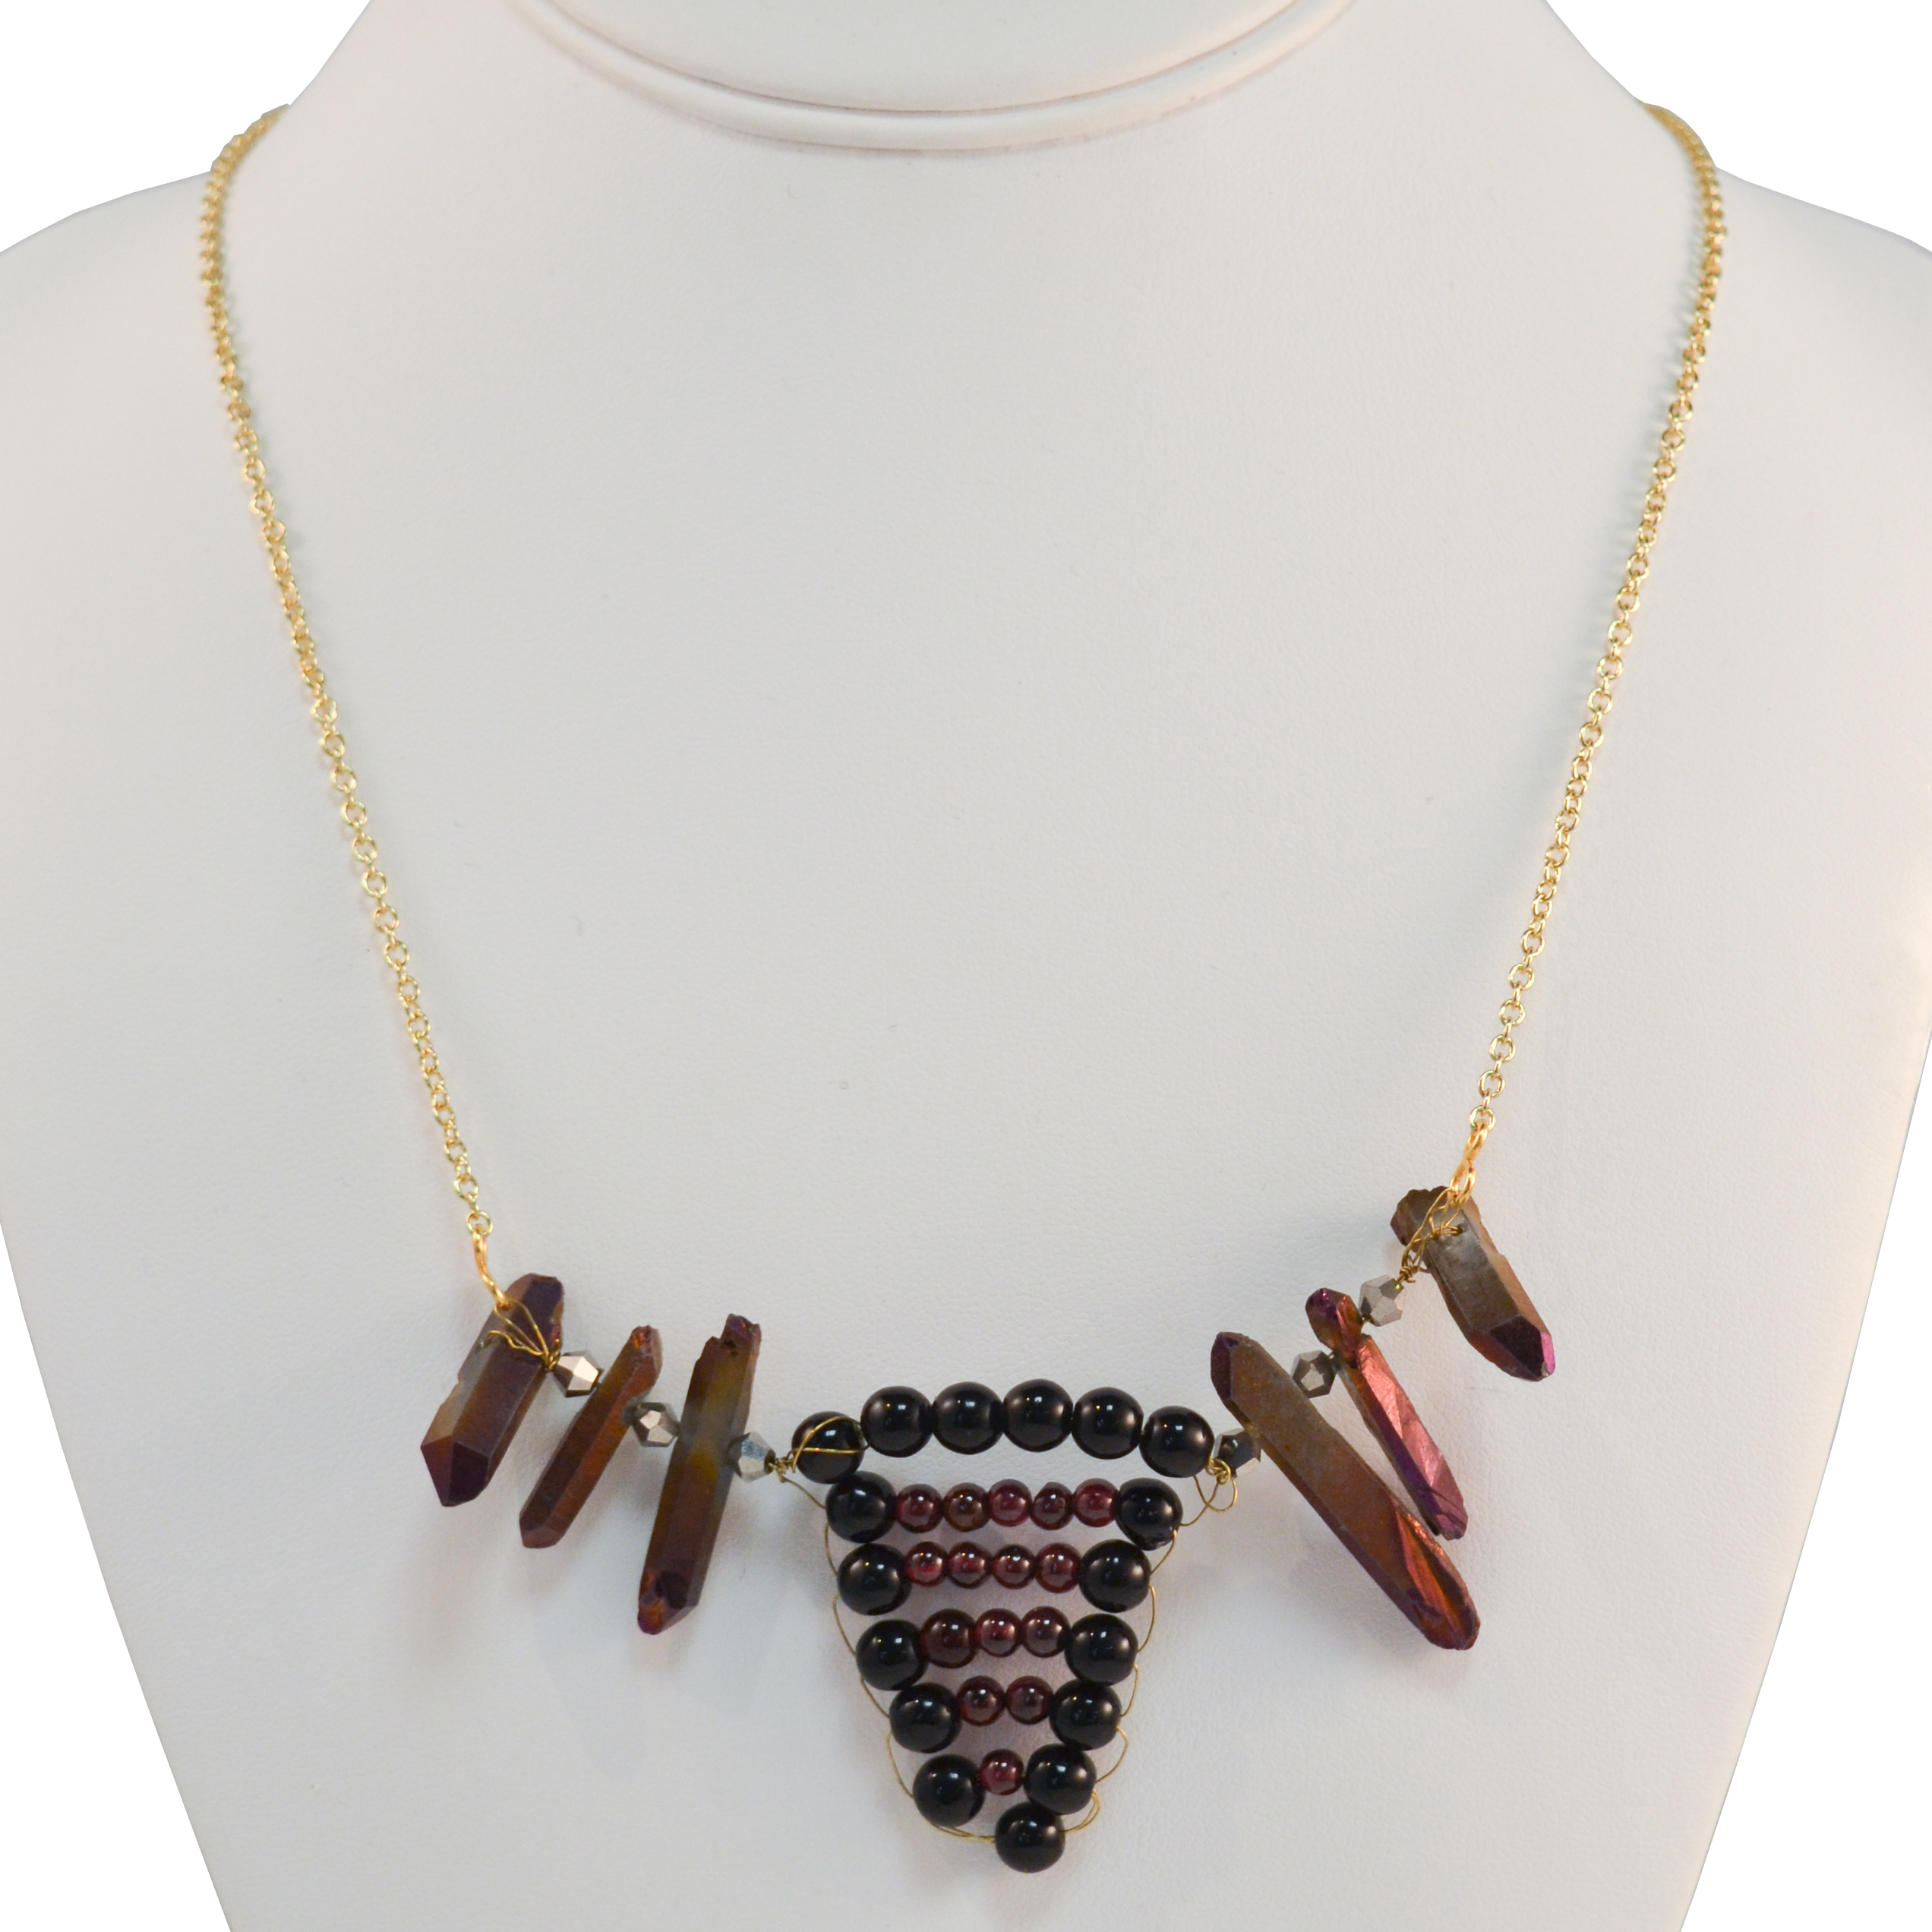 Bead weaving and crystals necklace by Darryl Richards